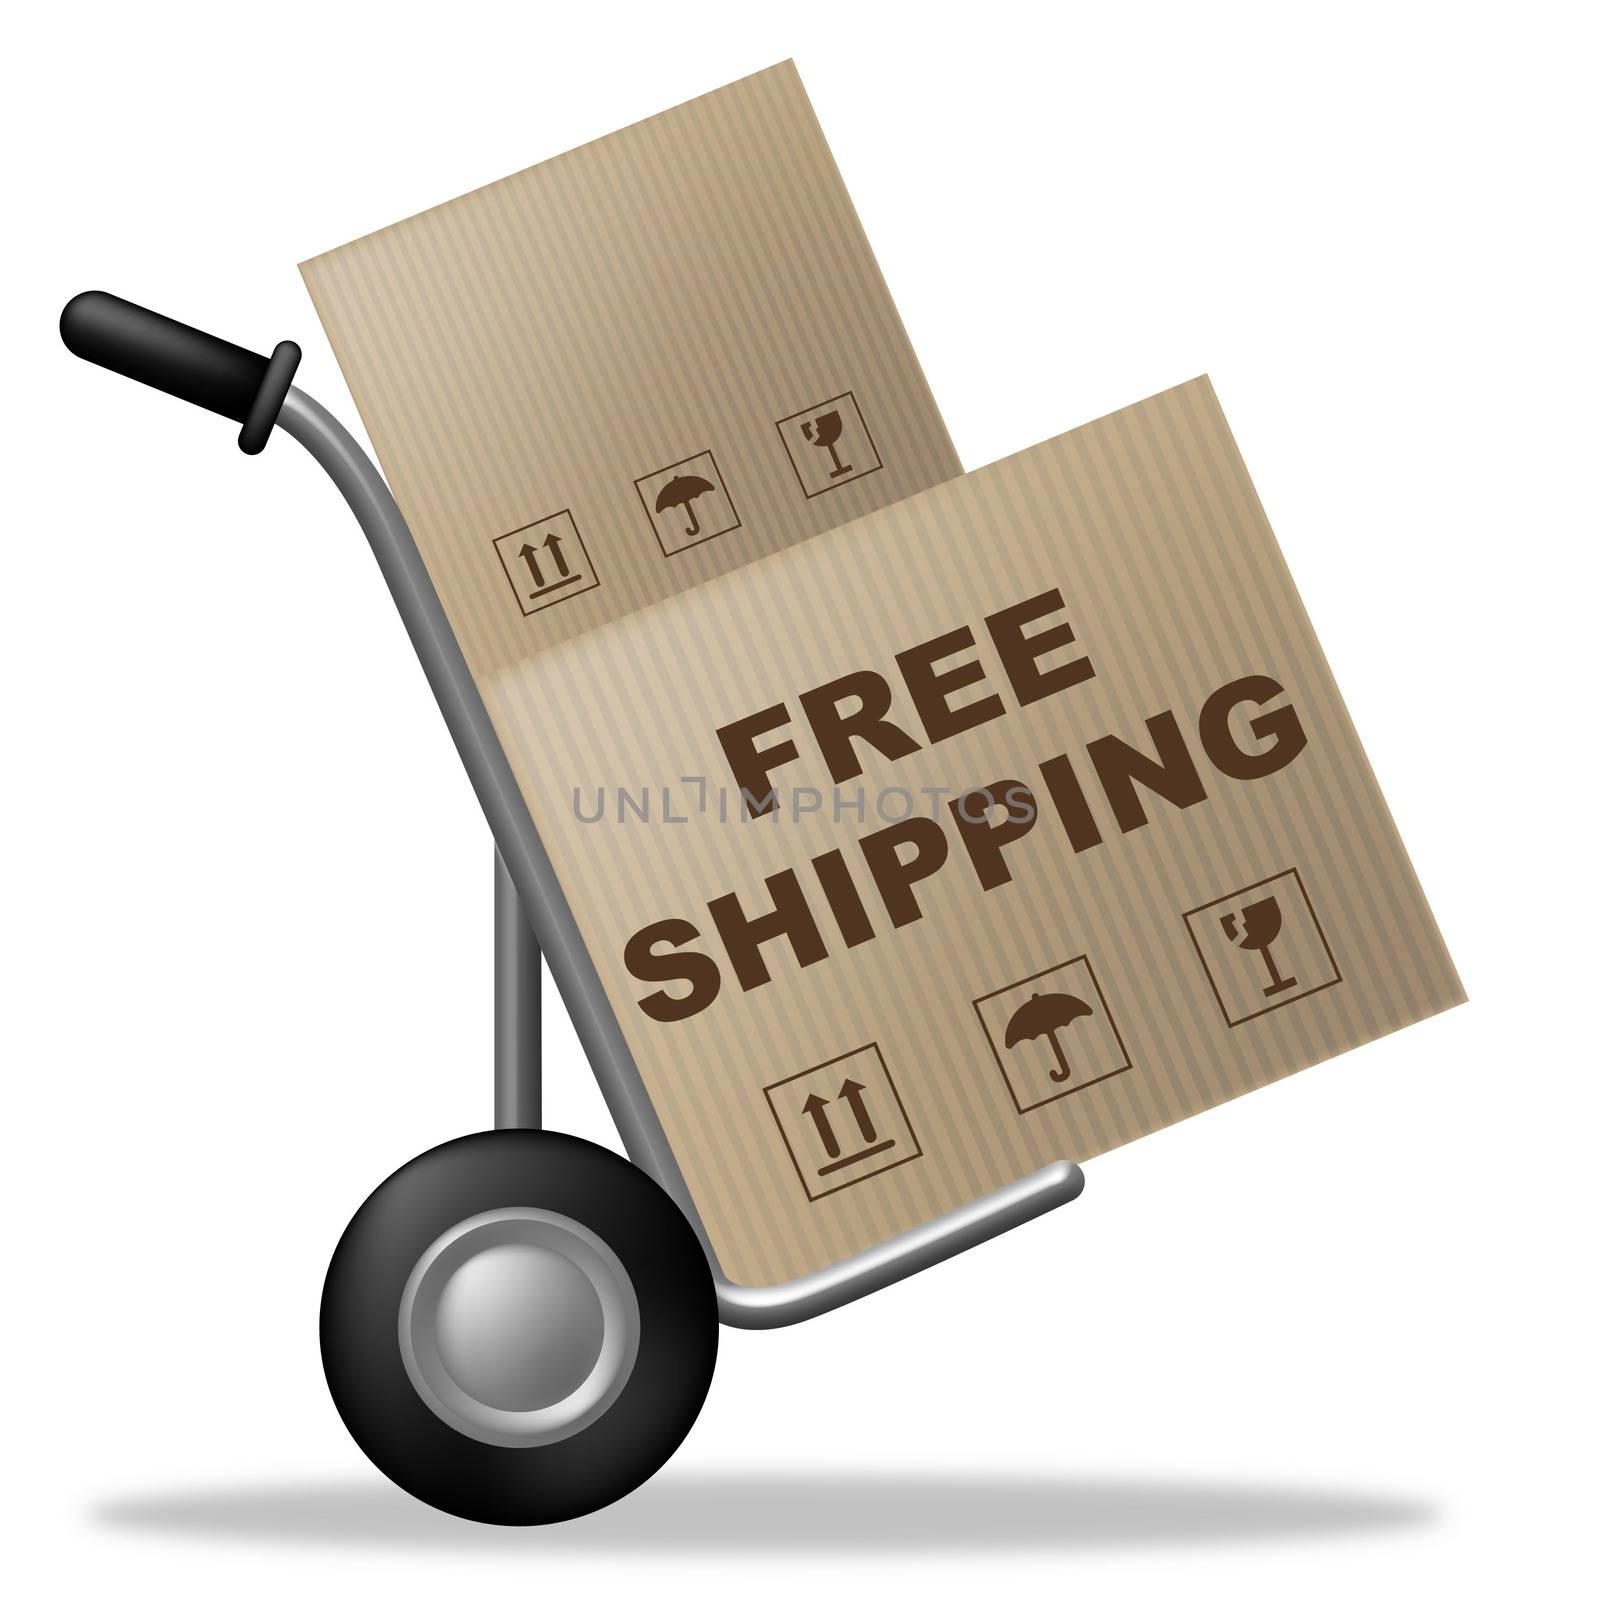 Free Shipping Represents With Our Compliments And Complimentary by stuartmiles